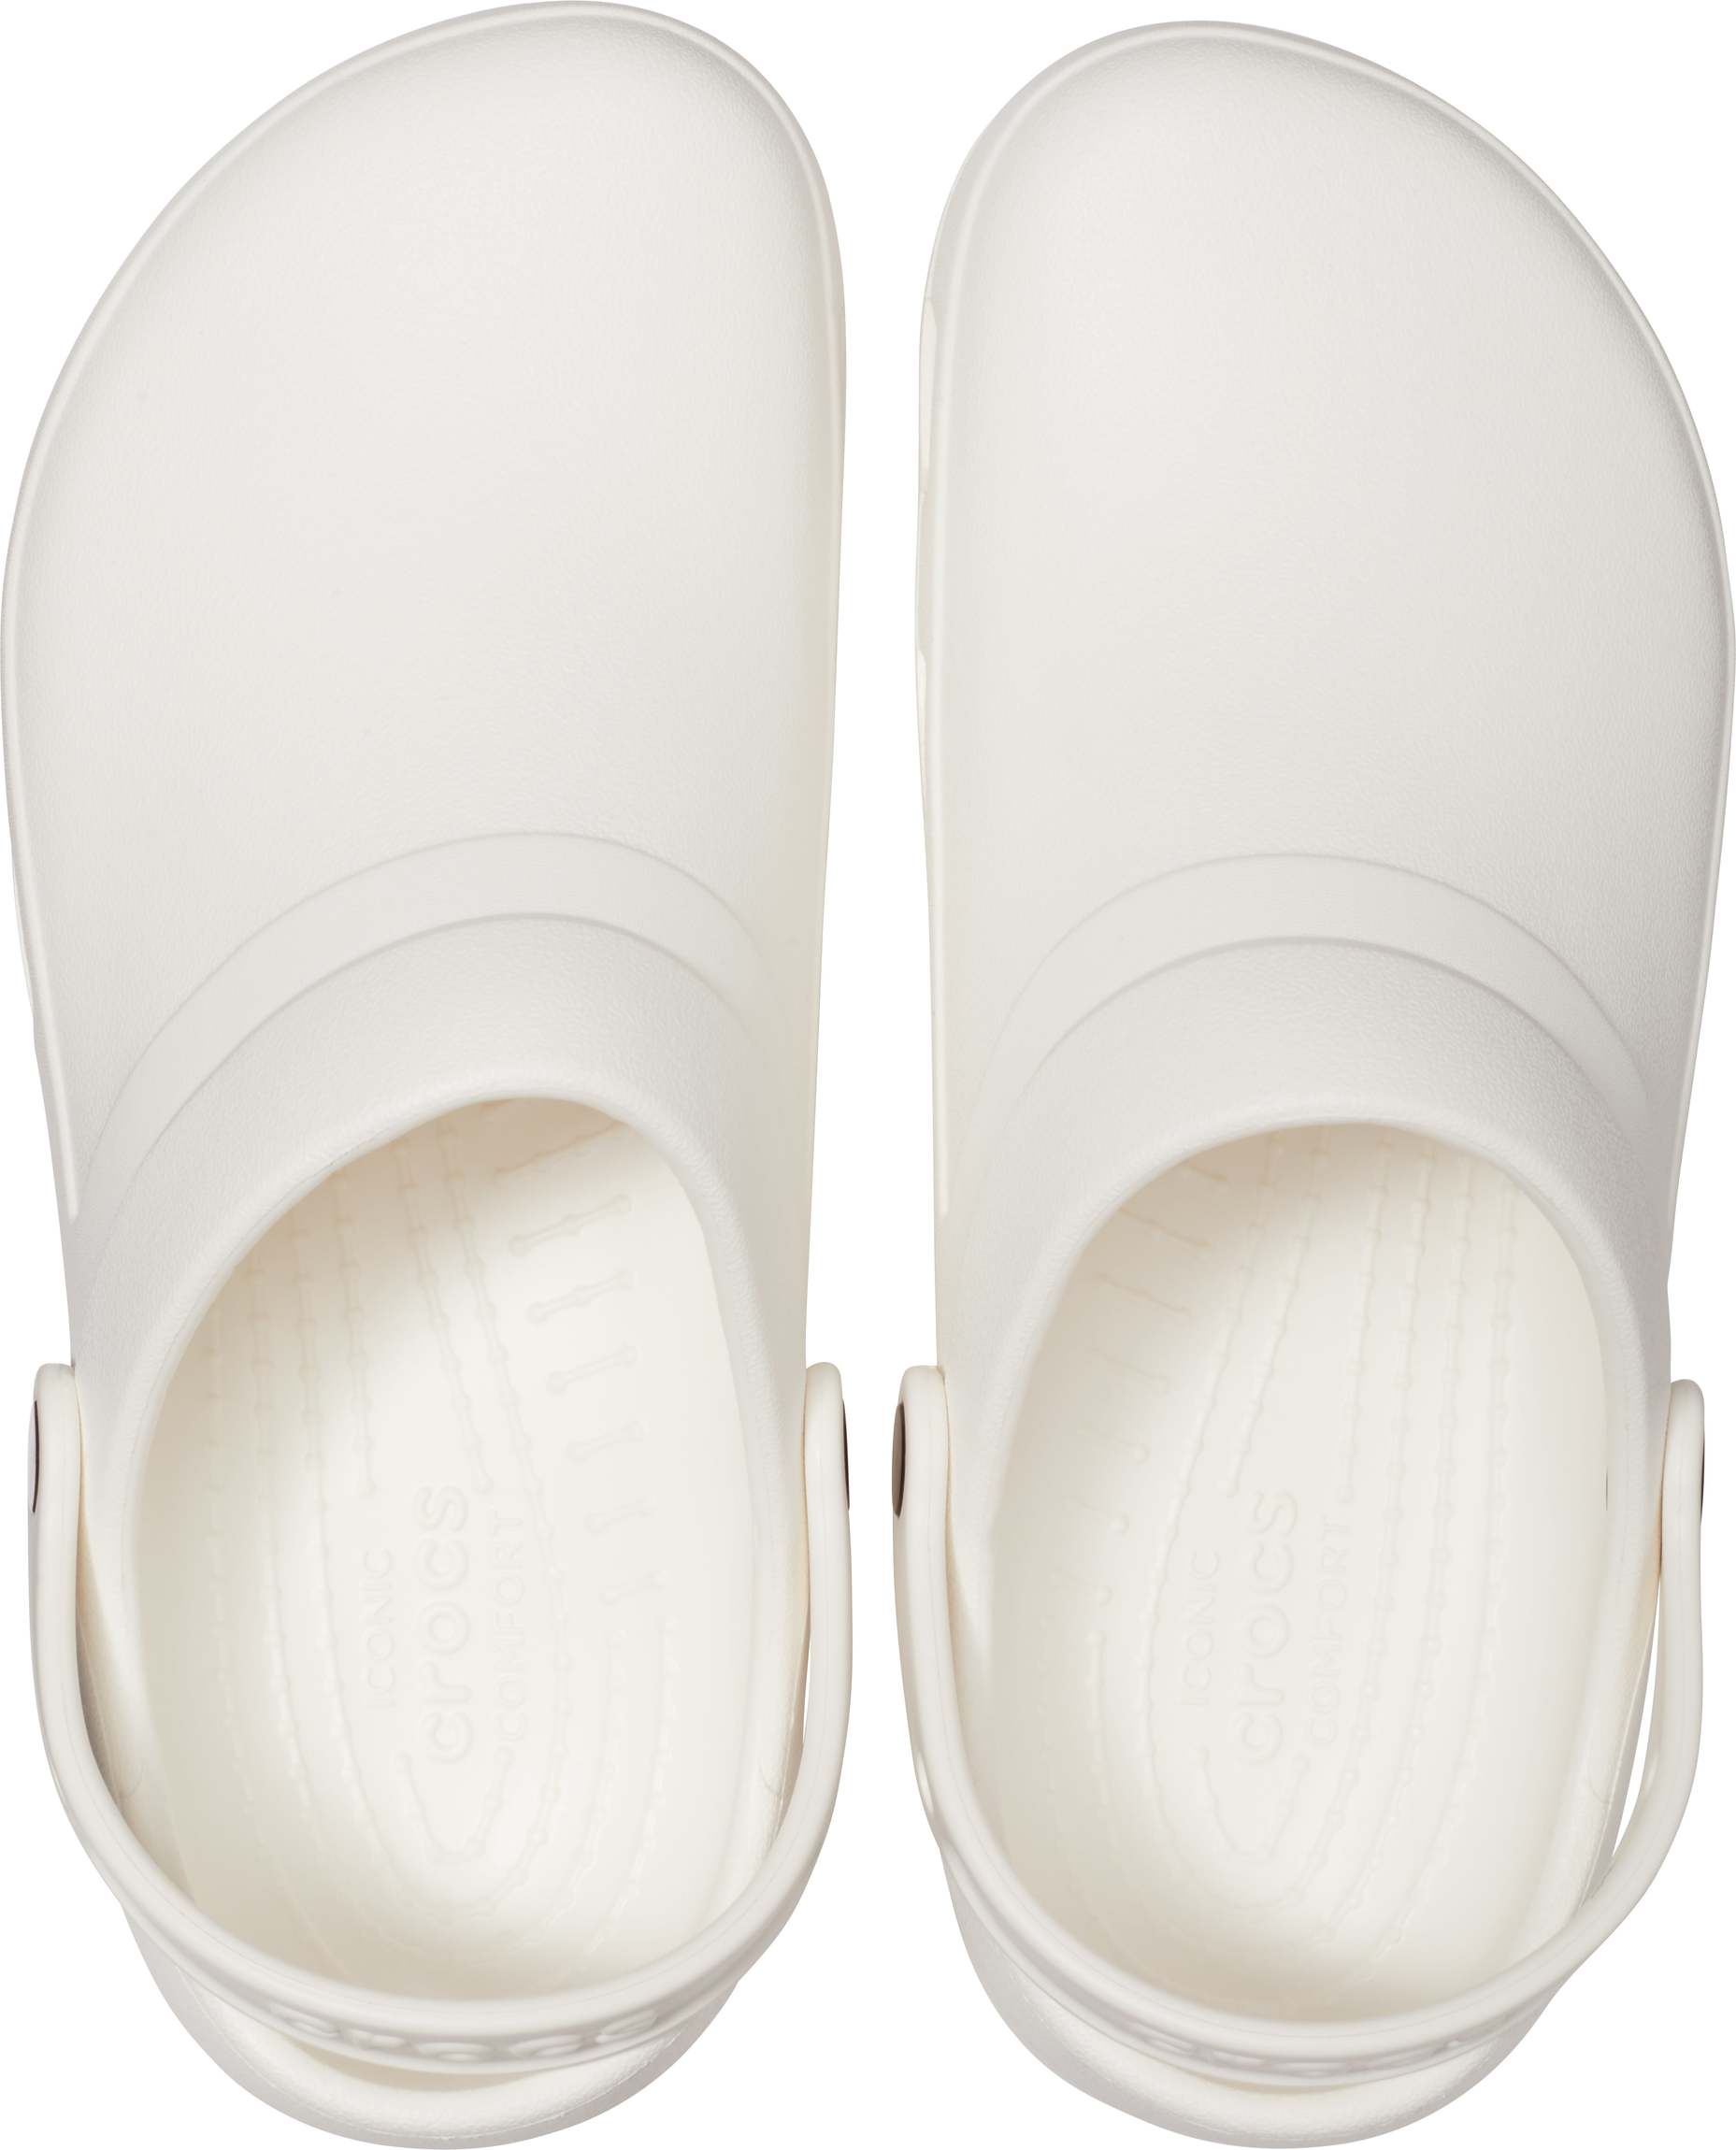 Specialist II Vent Clog White